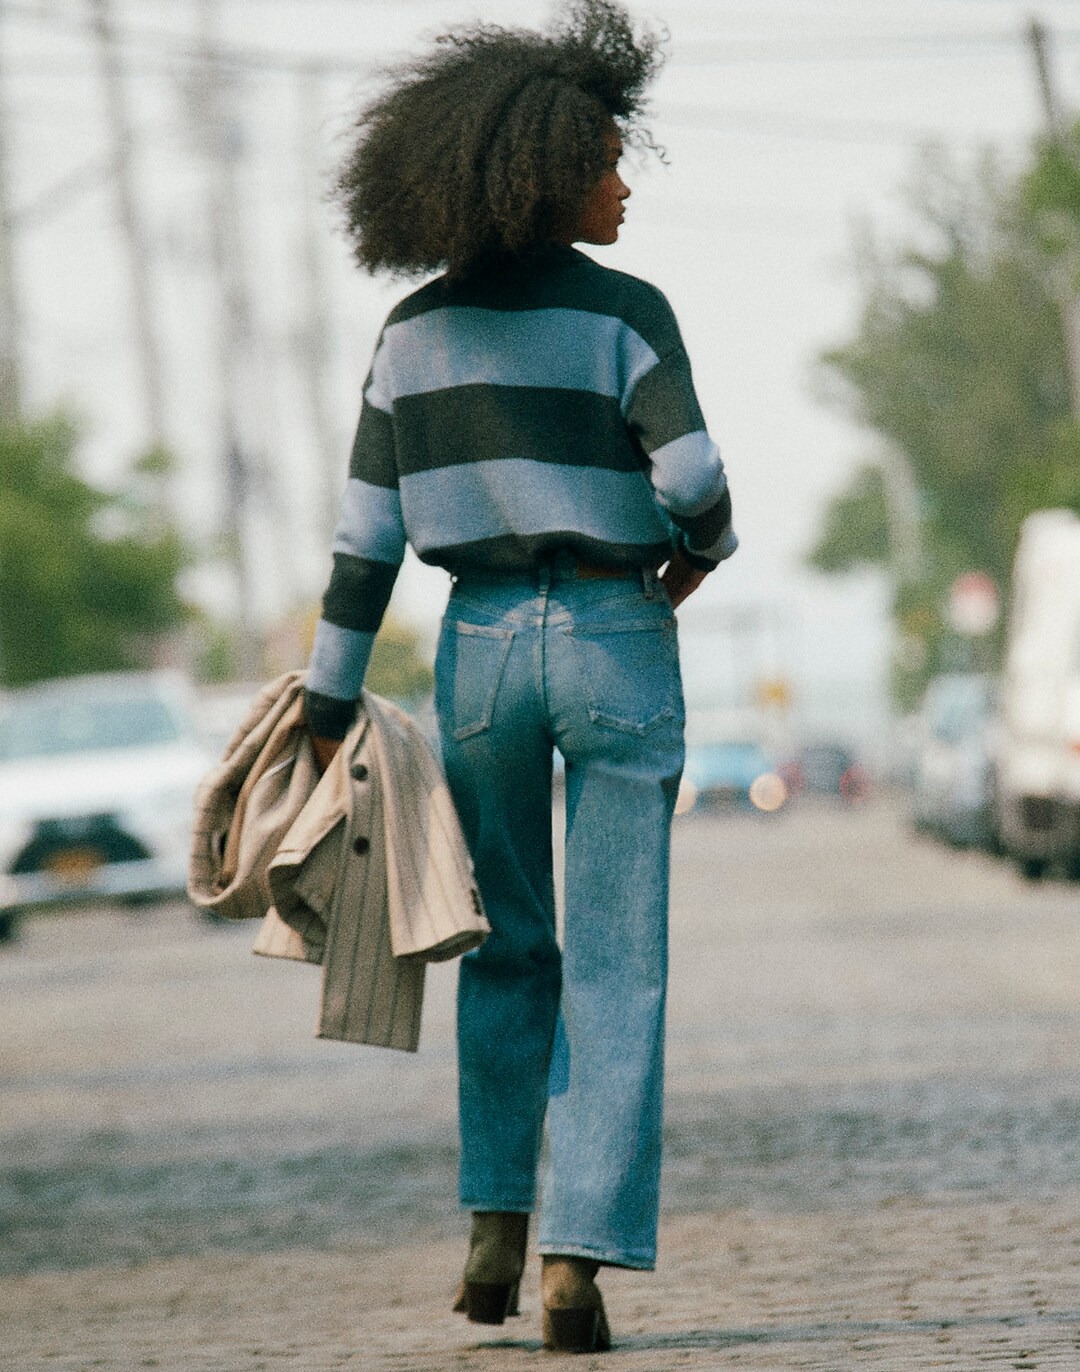 How To Style: Madewell's The Perfect Vintage Jeans - By Charlotte B